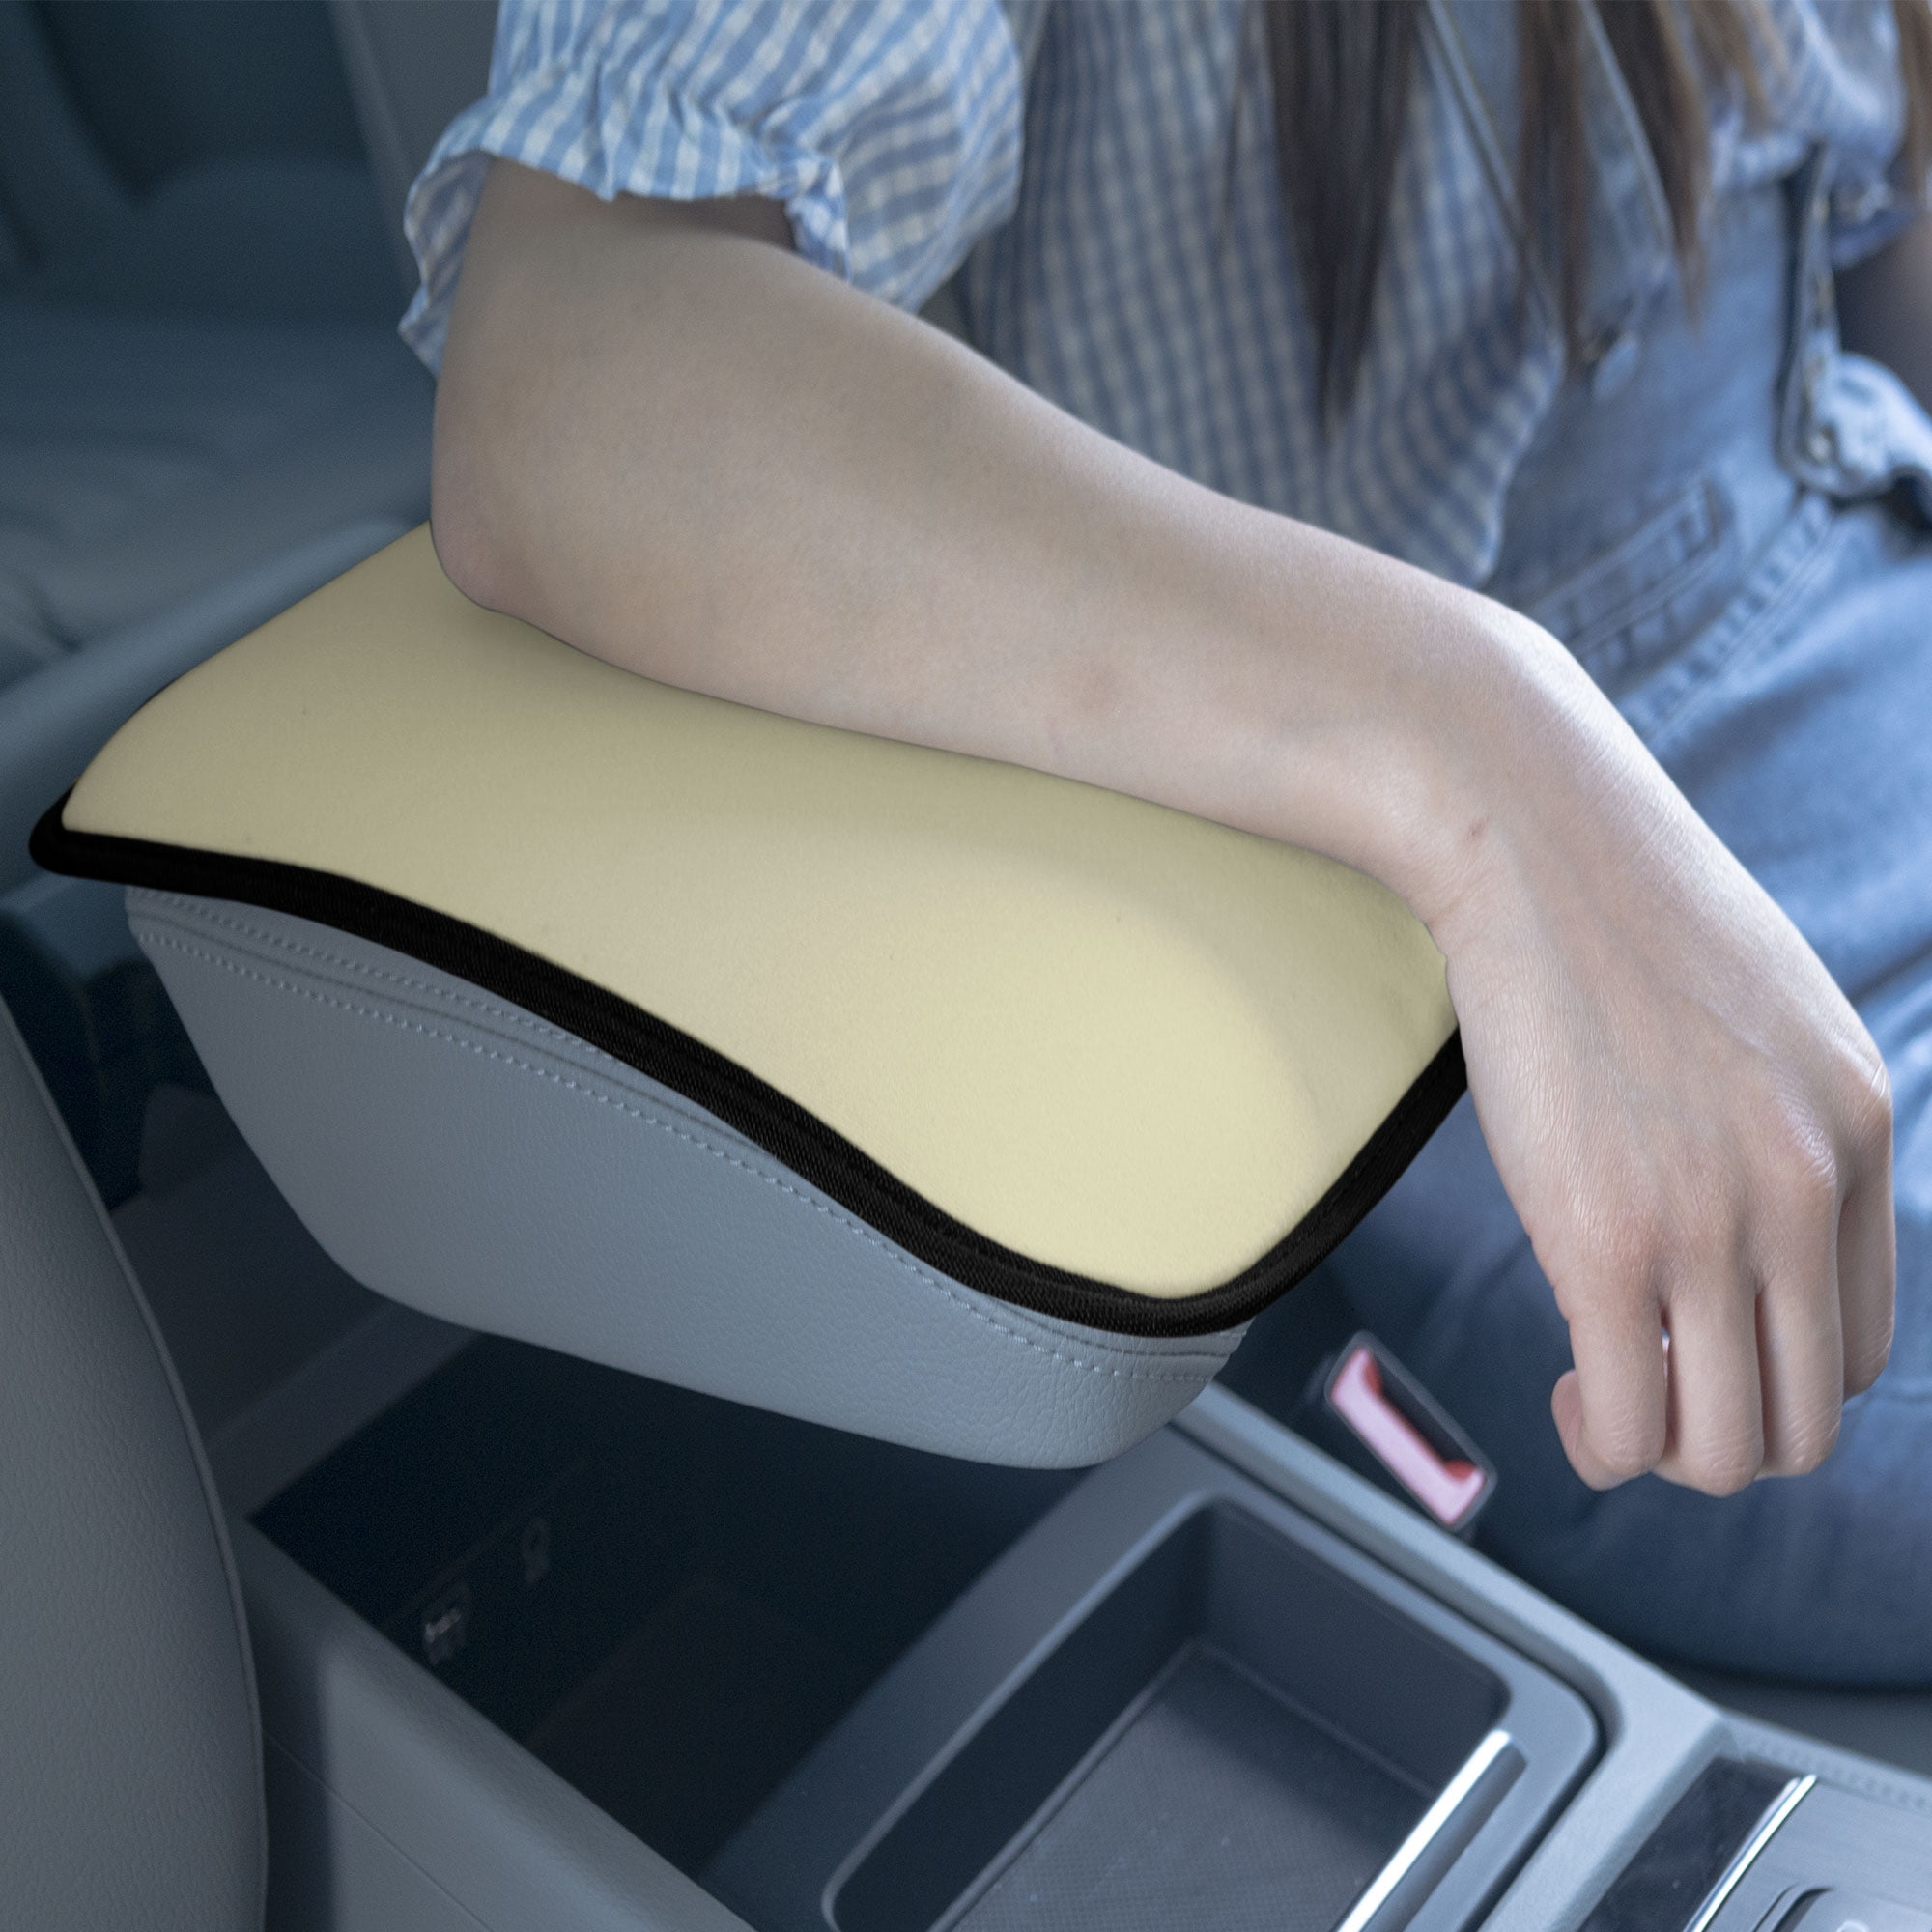 Sunflower Auto Center Console Armrest Pad: Universal Fit For - Temu